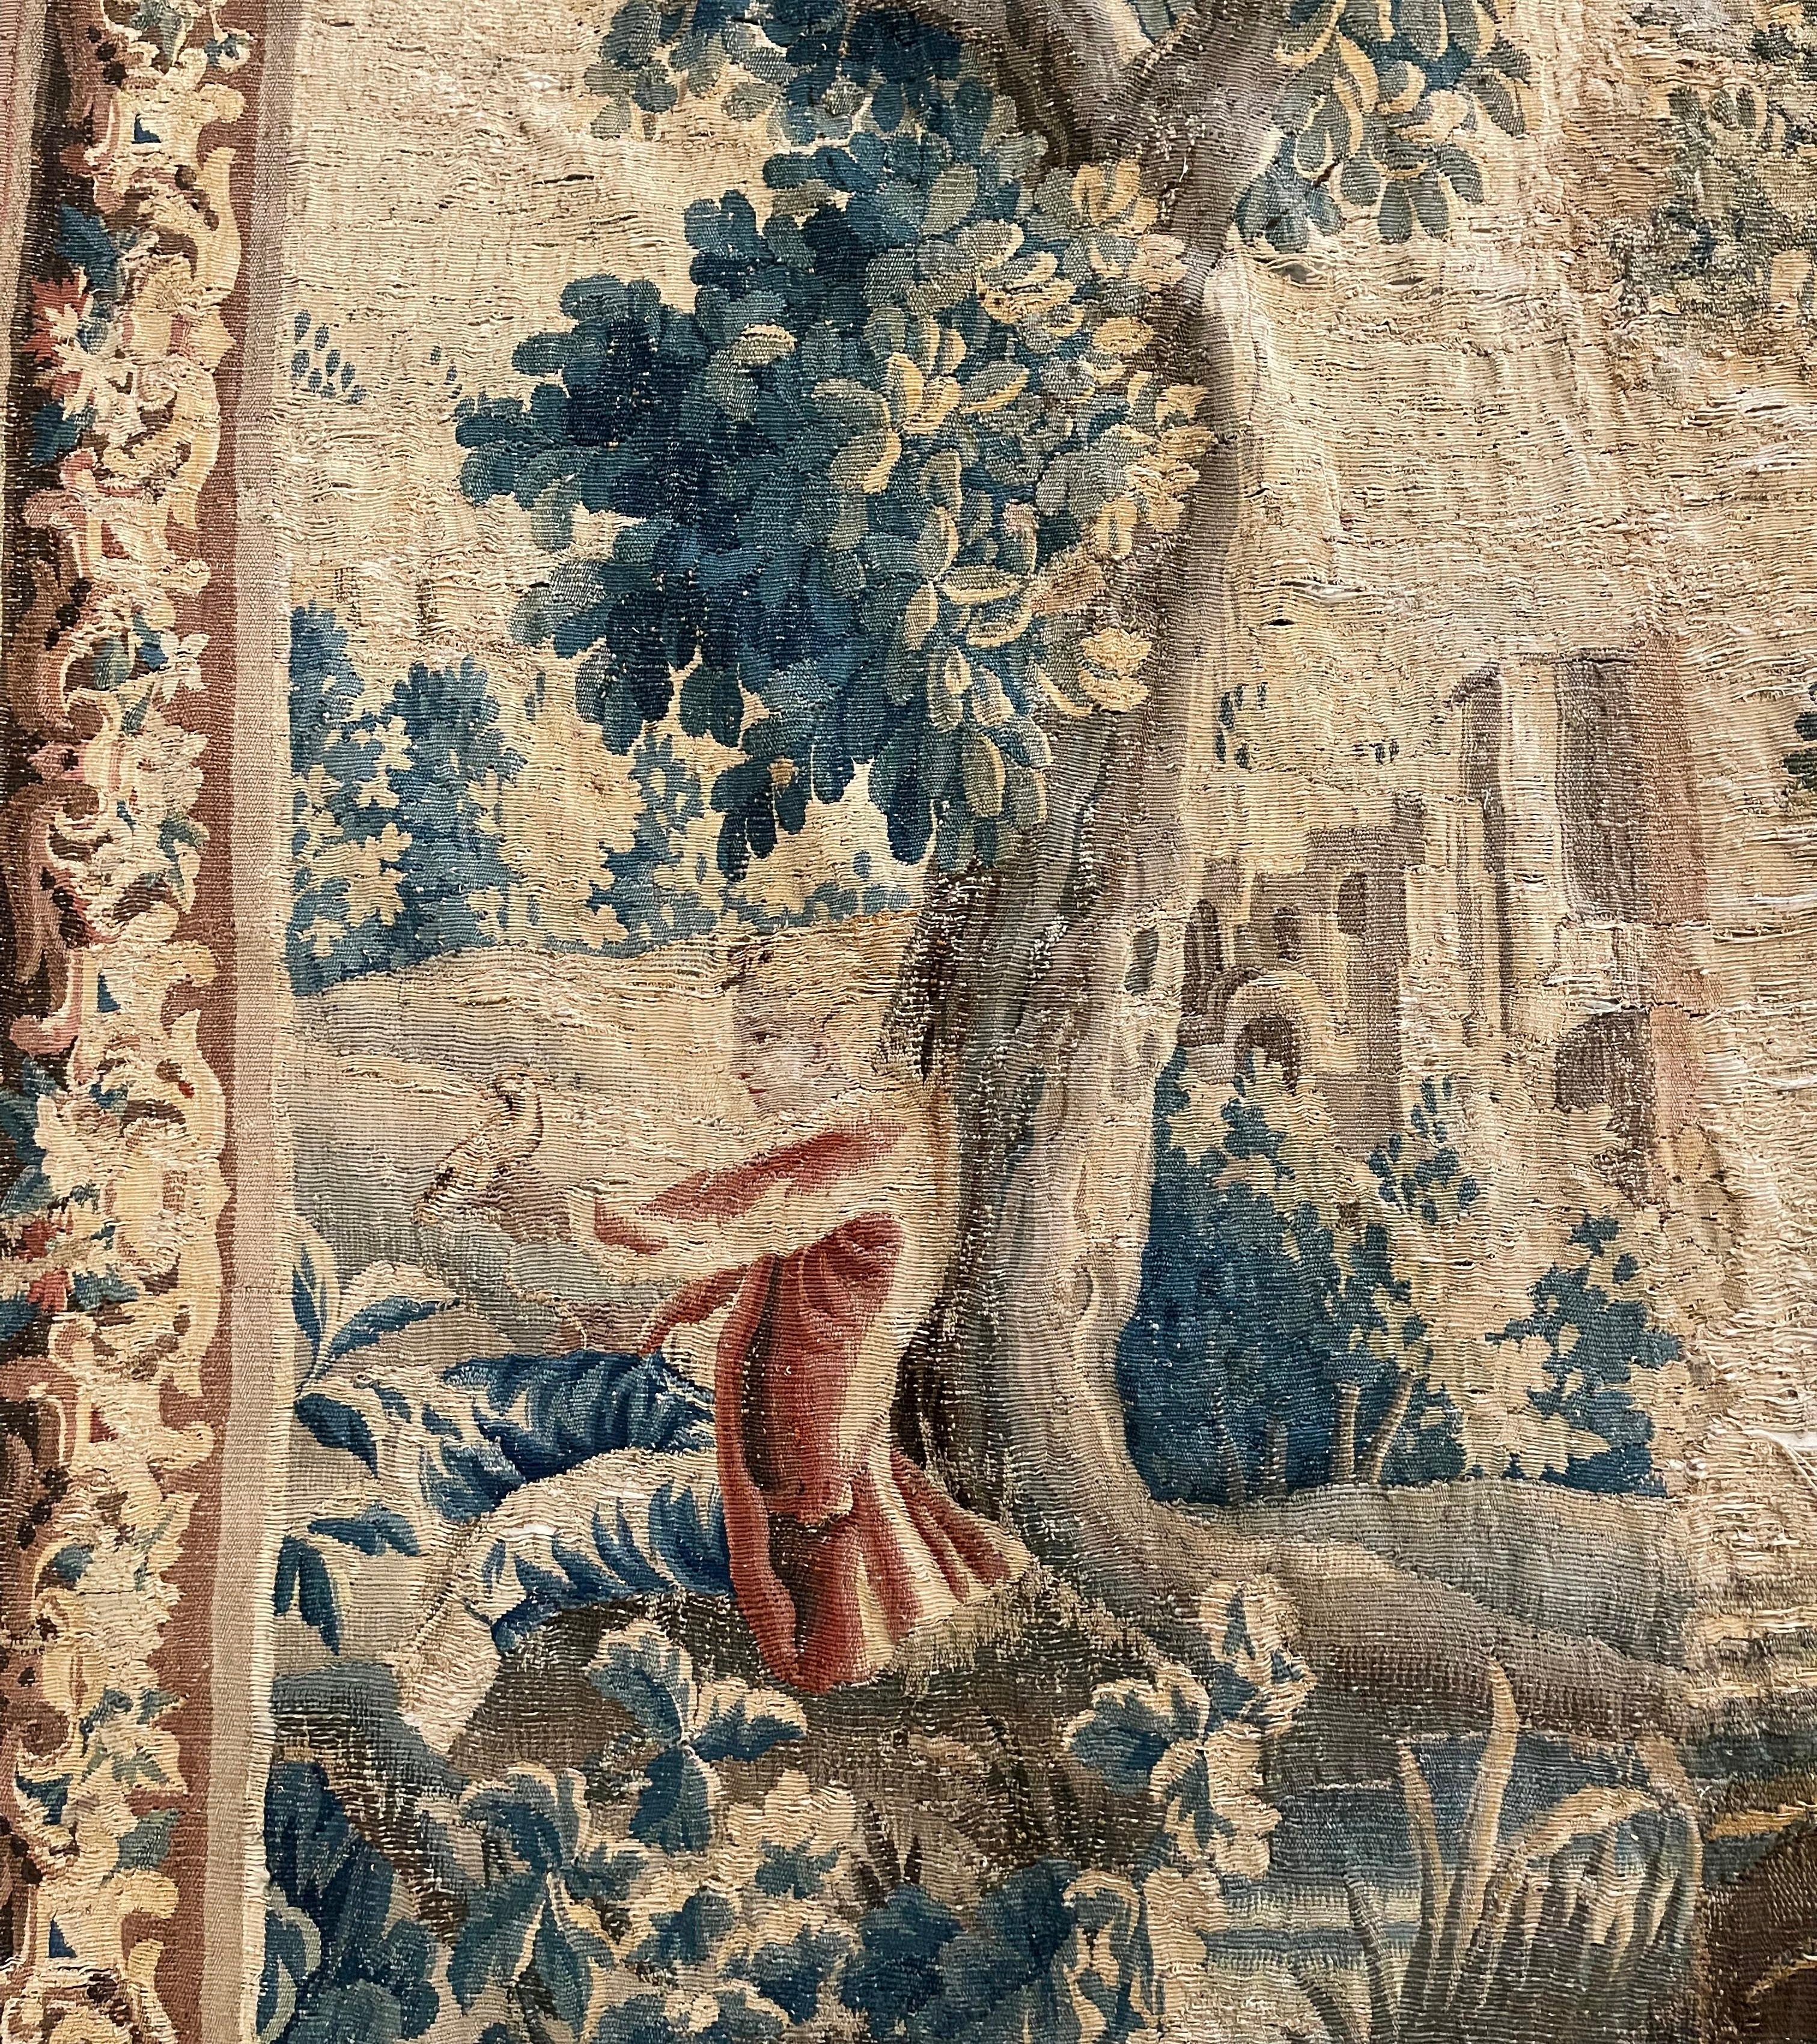 Hand-Woven Mid-18th Century French Handwoven Aubusson Verdure Tapestry with Gentleman